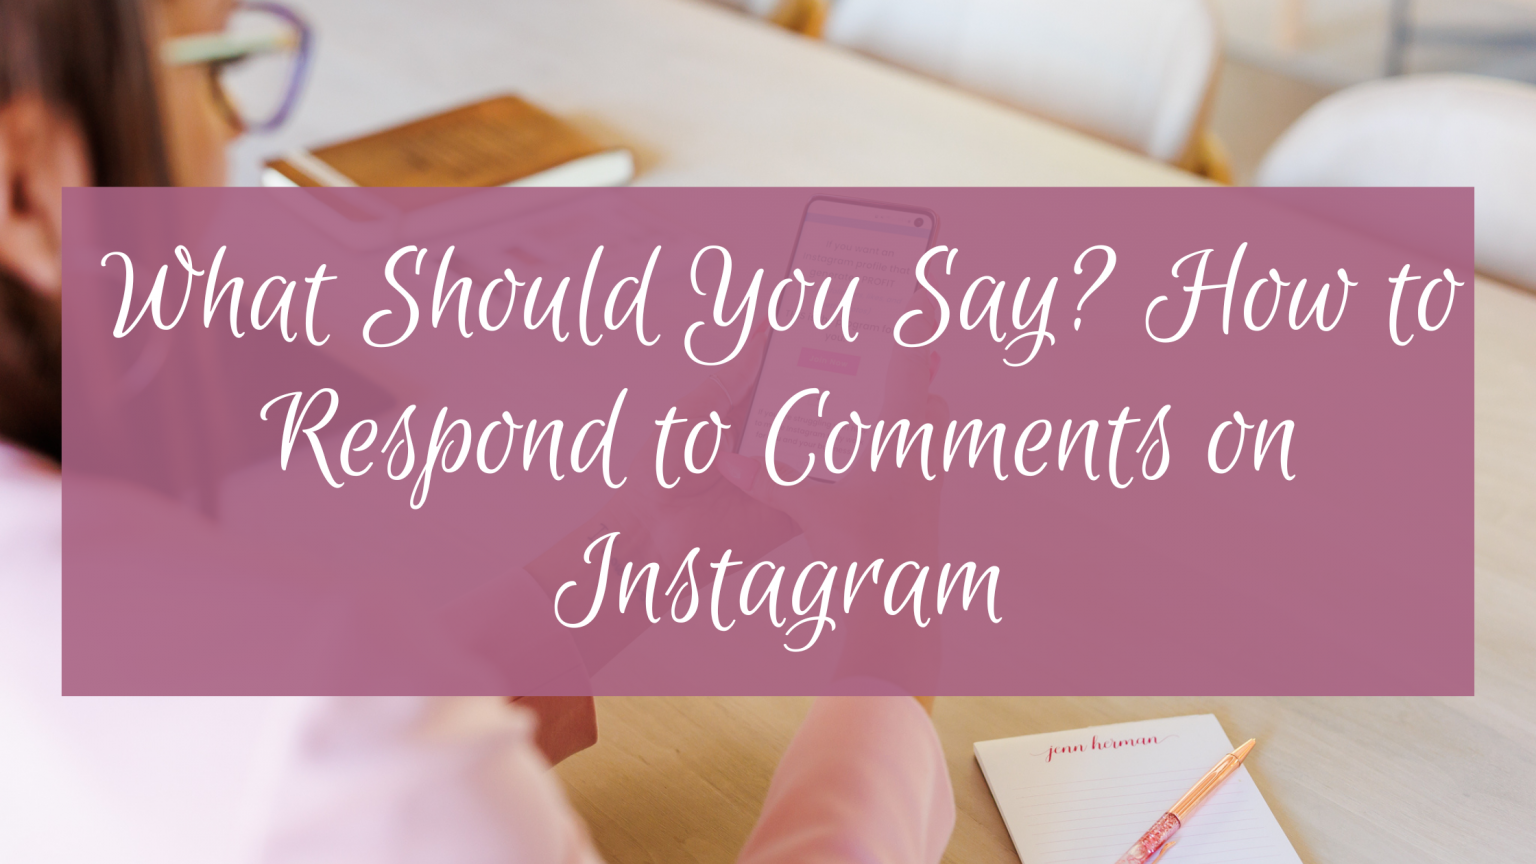 What Should You Say? How to Respond to Comments on Instagram